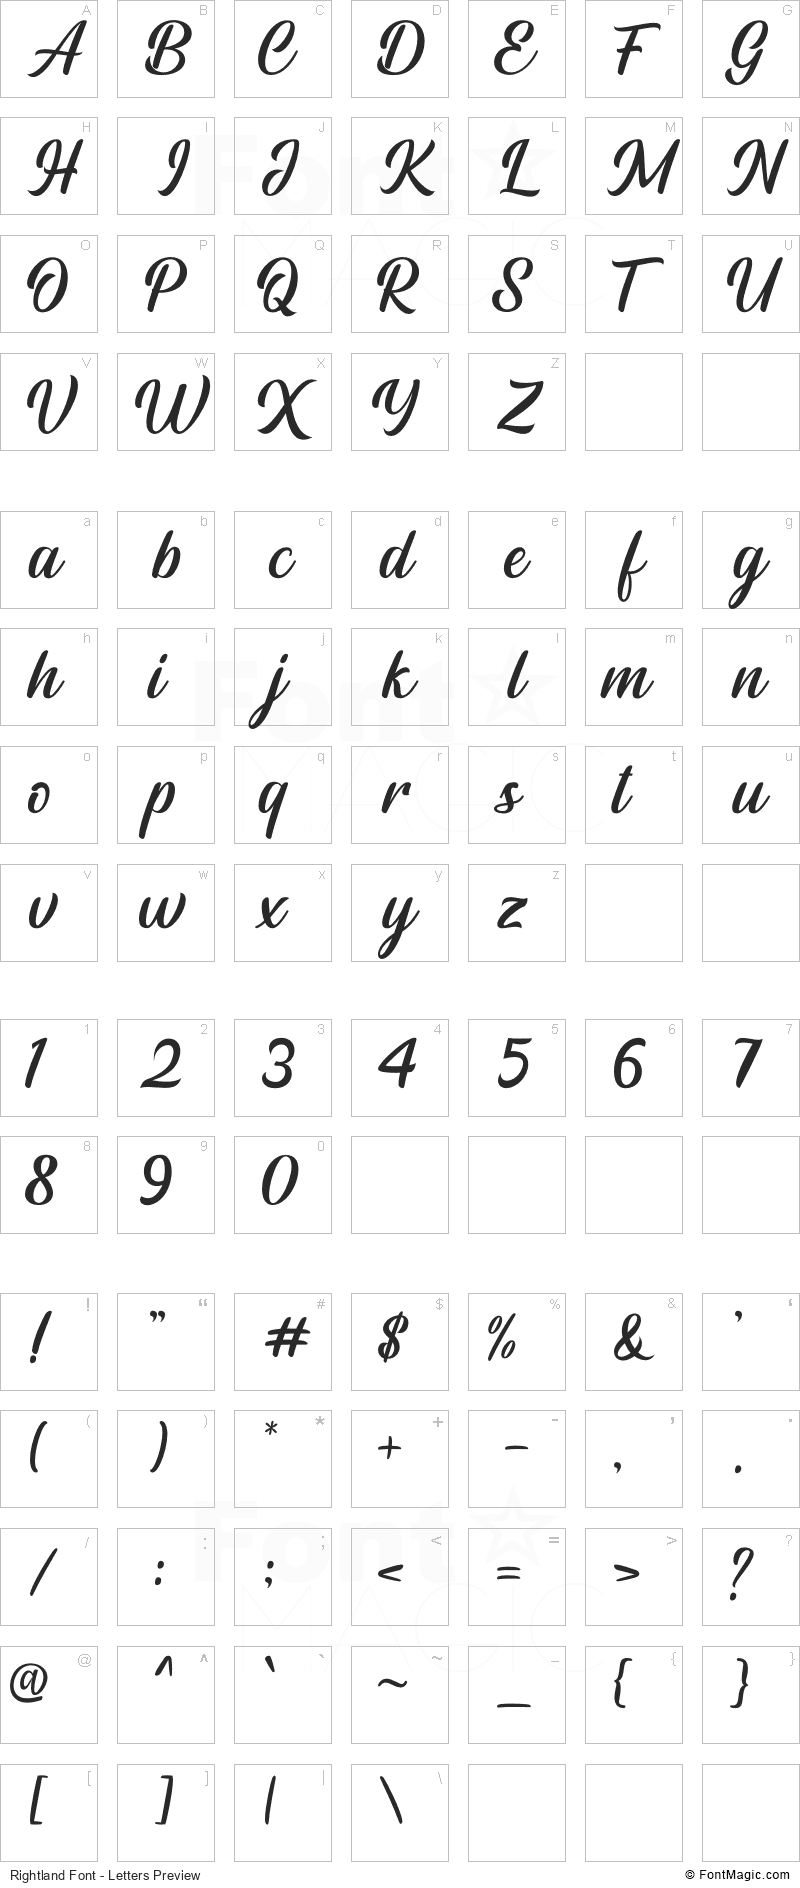 Rightland Font - All Latters Preview Chart